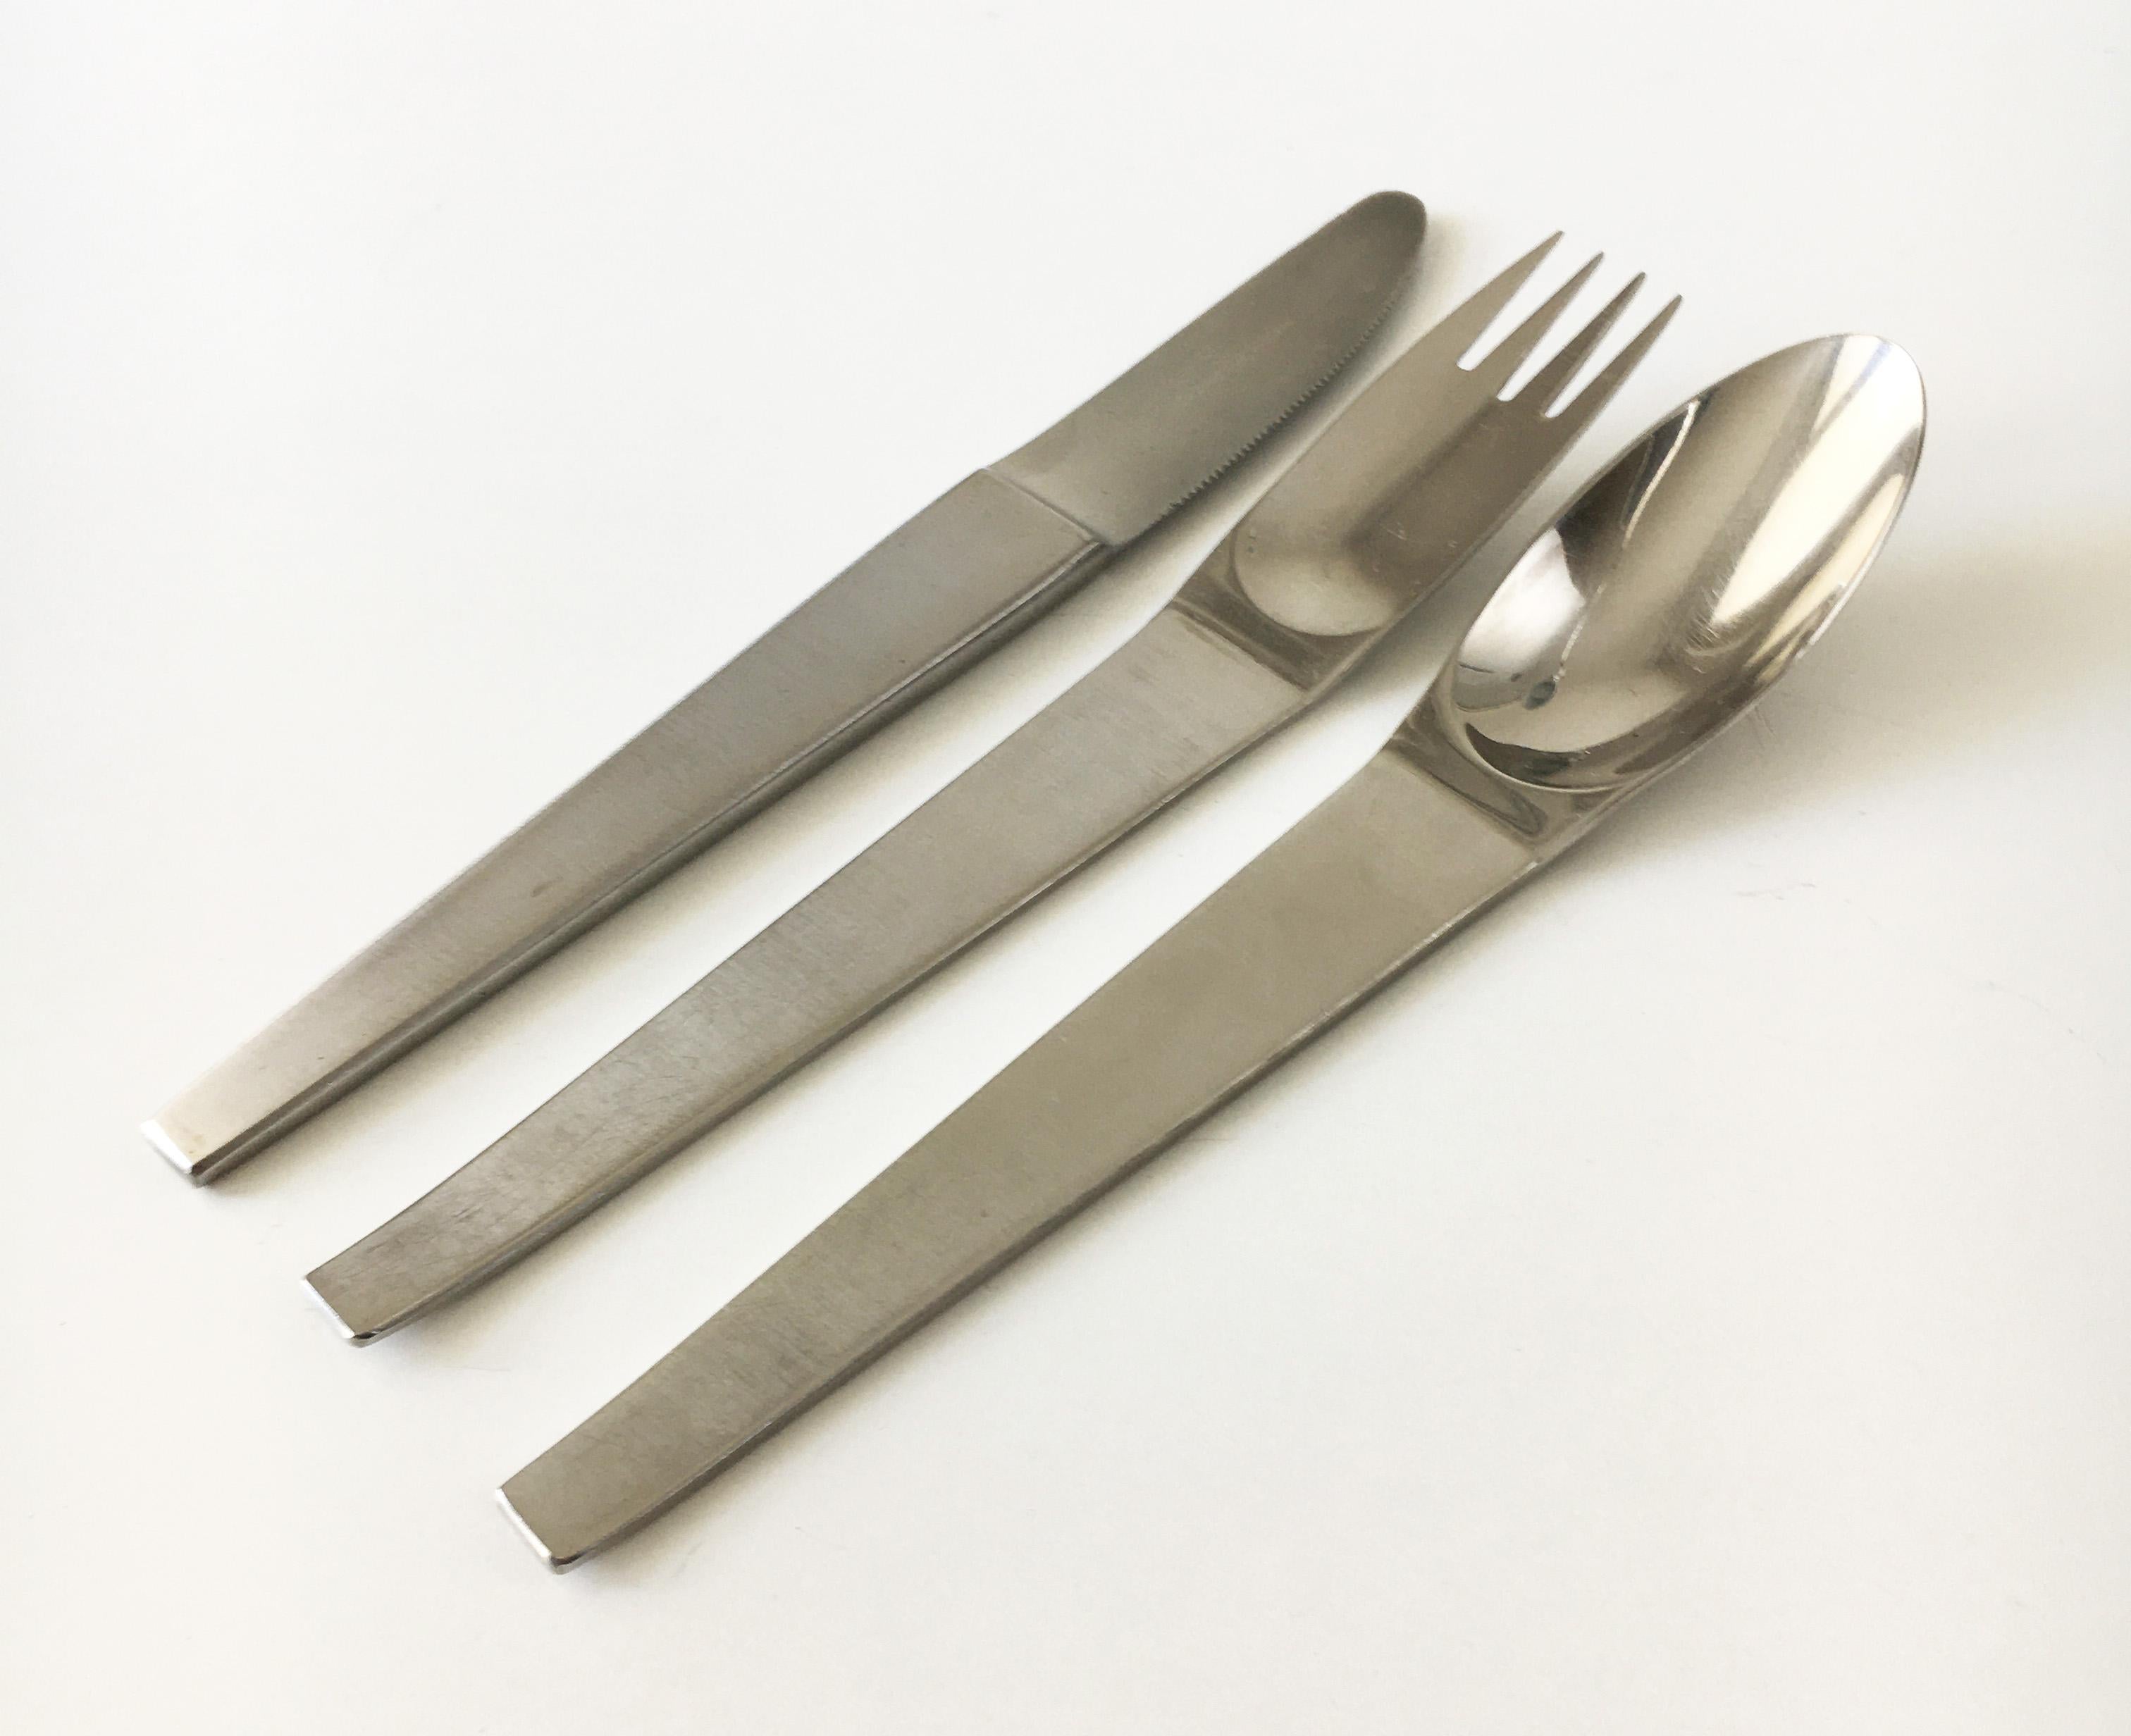 Modernist set of Austrian flatware from the 1950s, designed by Carl Aubock and executed by Amboss Austria. This is the high-quality flatware set model no. 2060 a mid century classis, made of polished and brushed stainless steel. Consists of 24